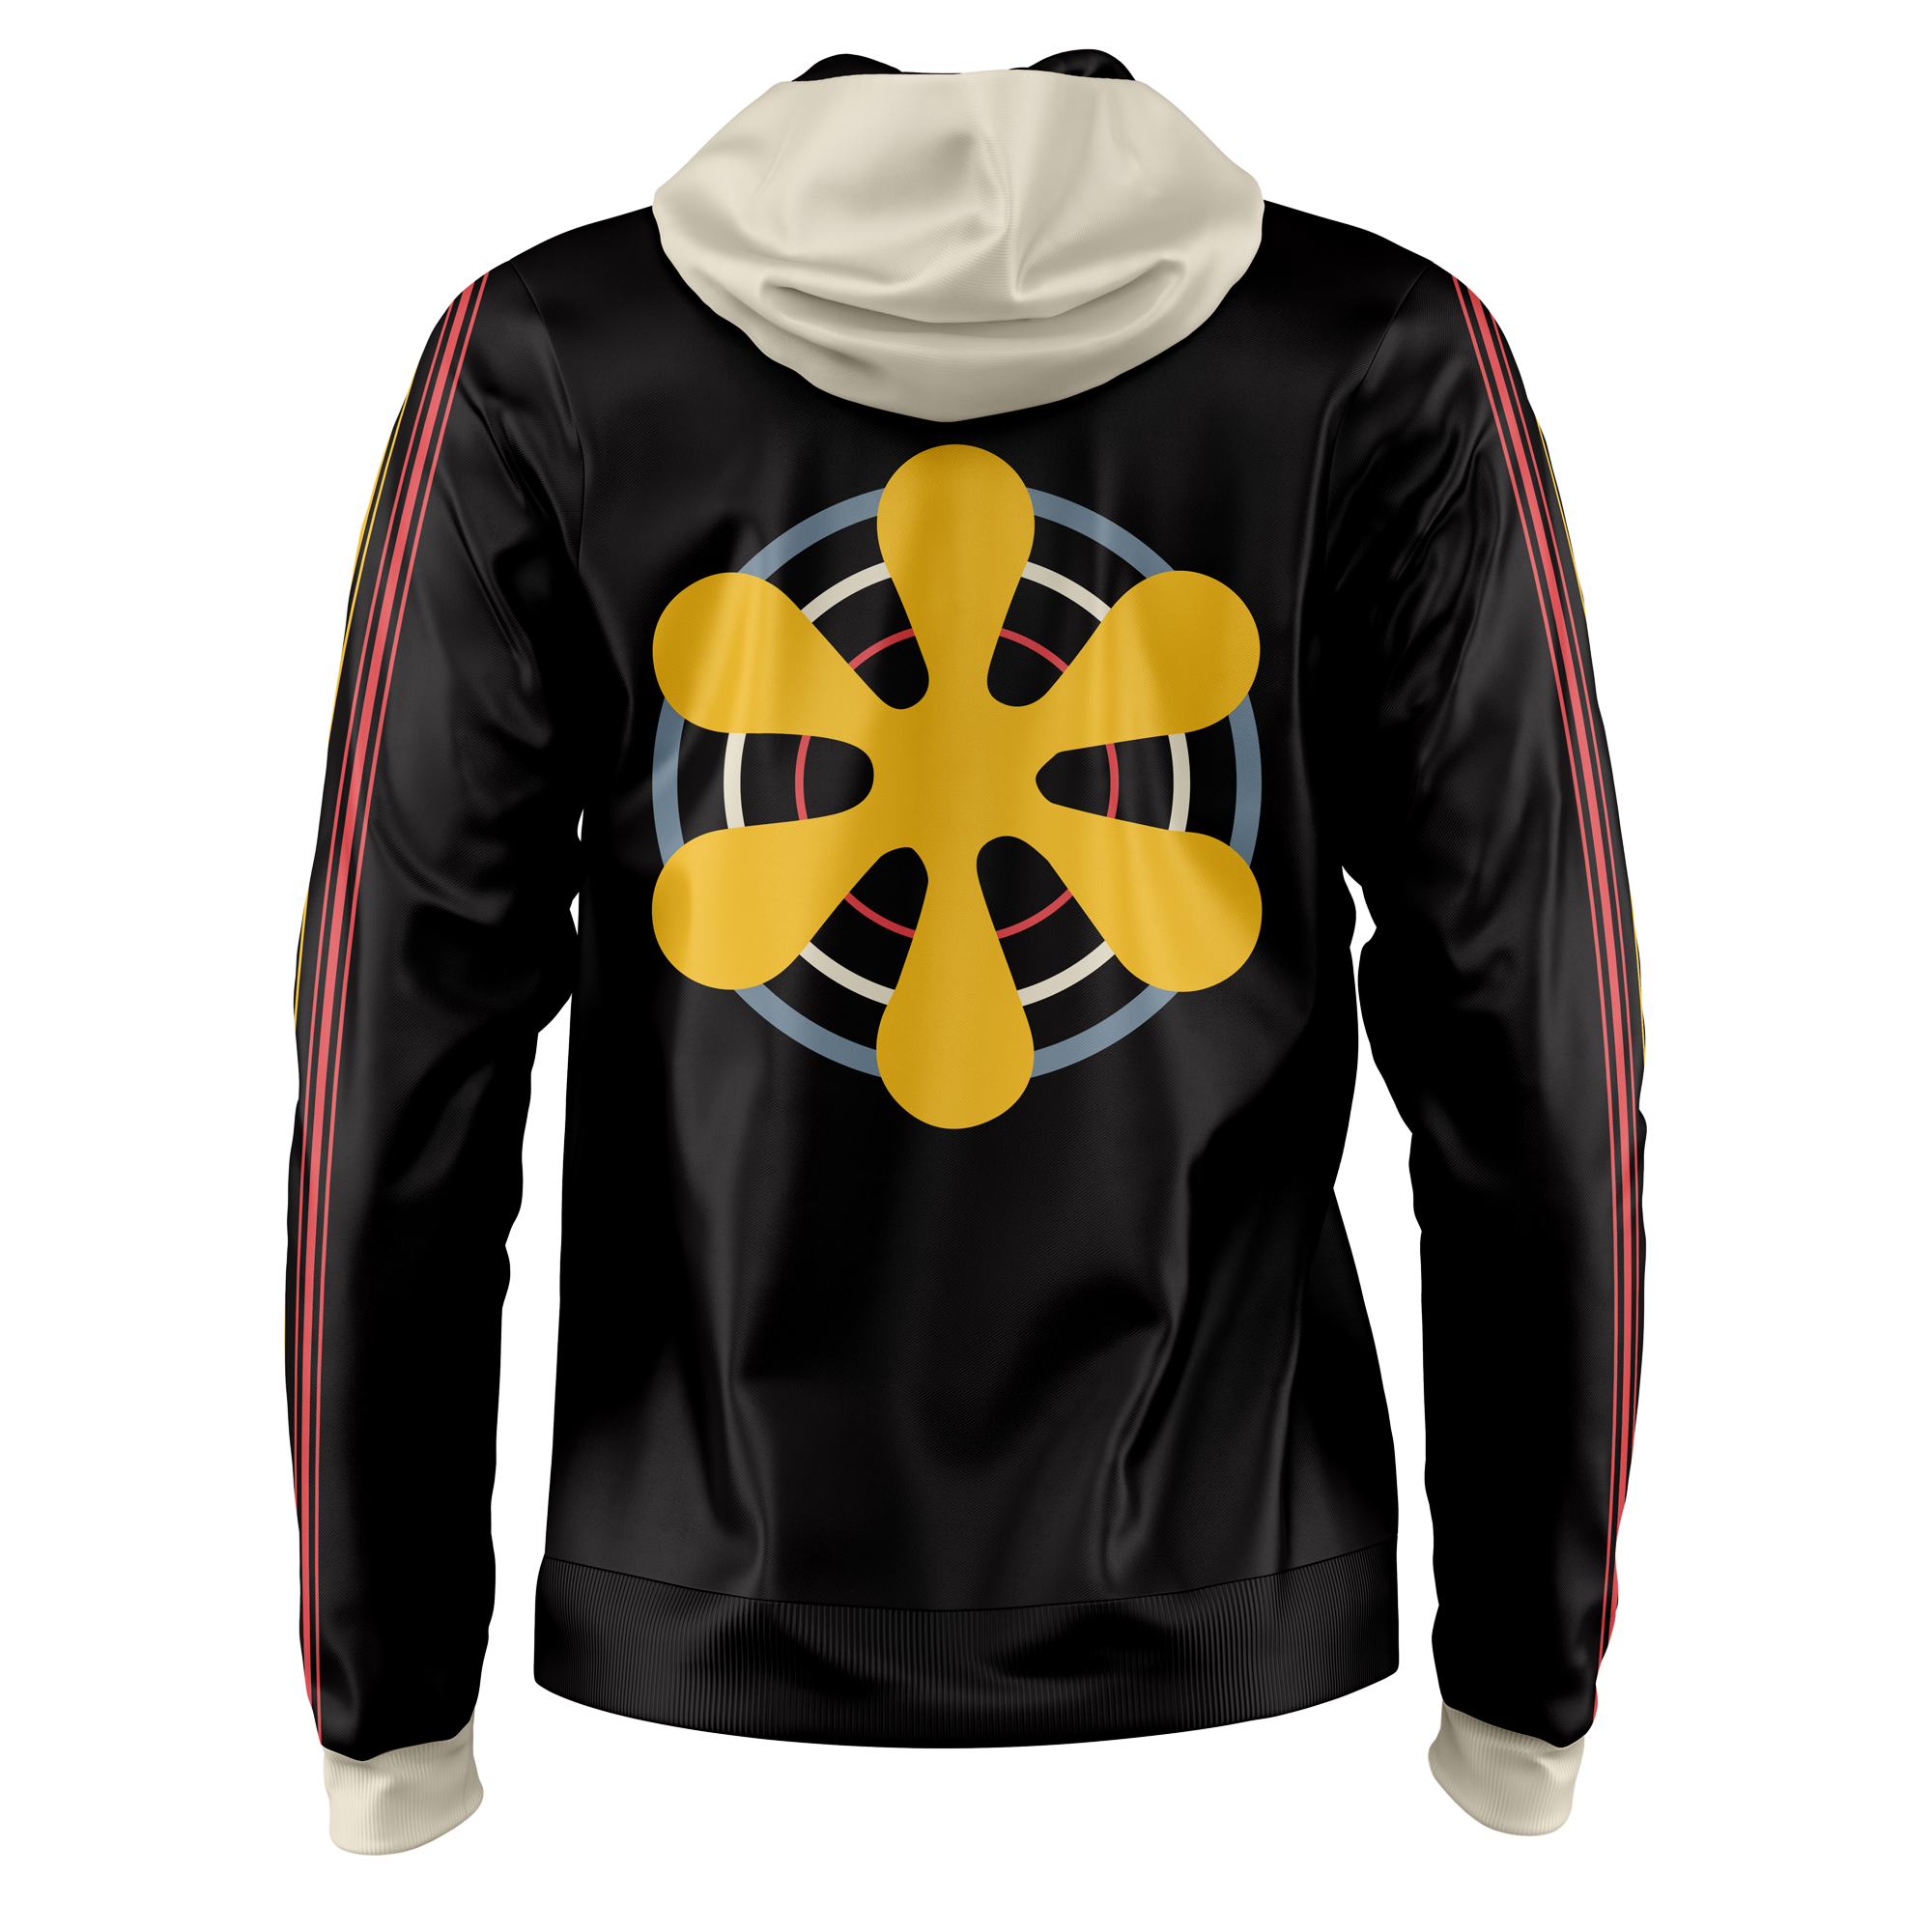 the*gameHERs Pro Pullover Hoodie